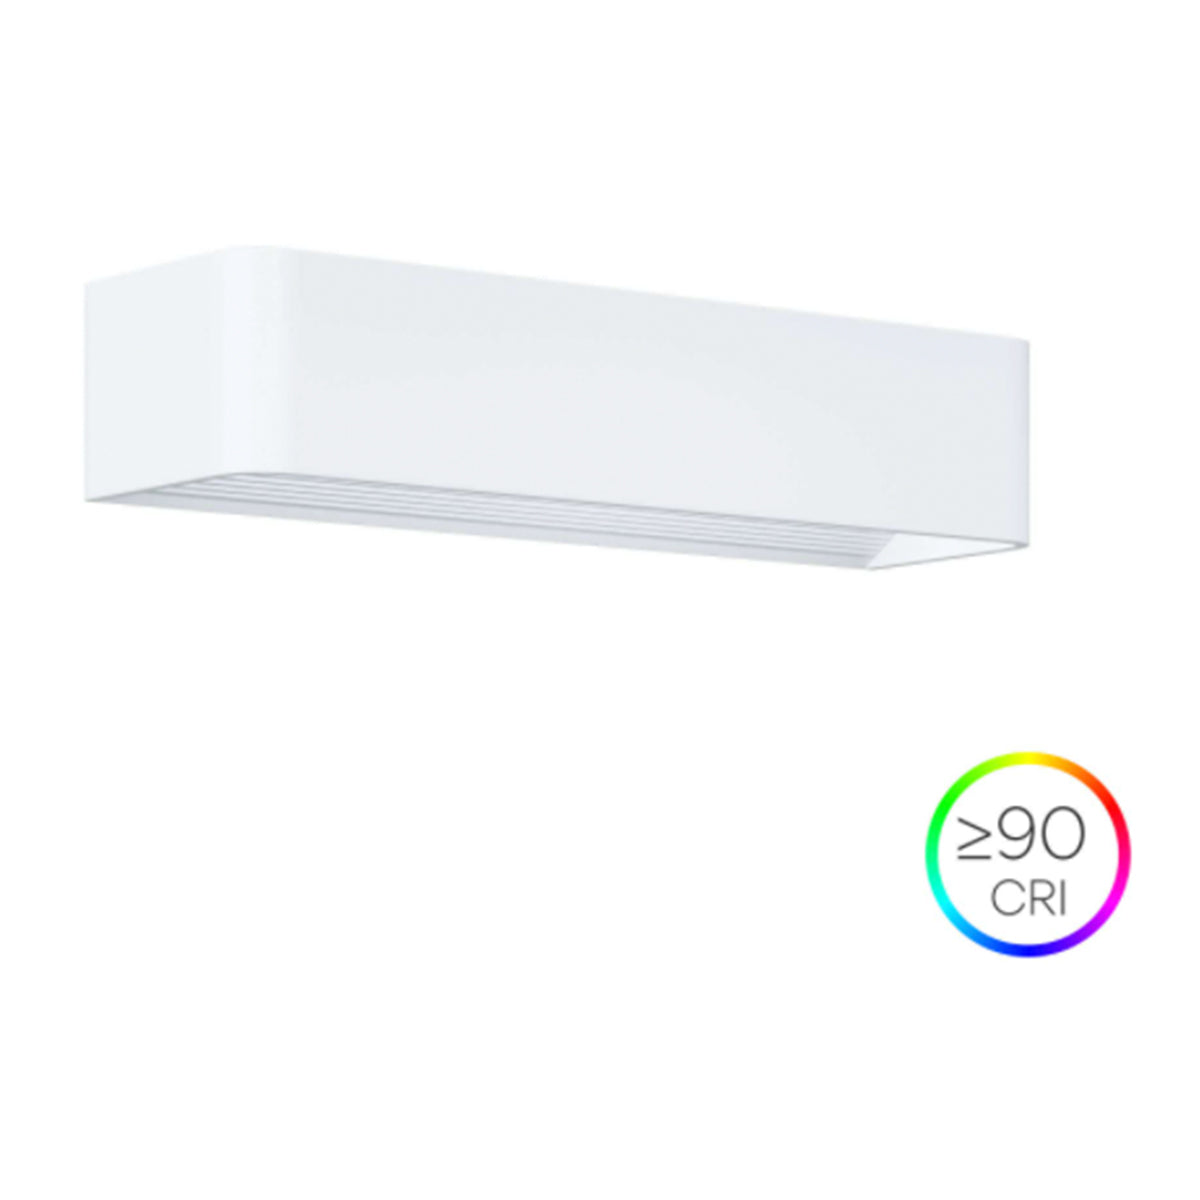 Beneito Faure ICON LED Wandleuchte 12W 200-240V color switch